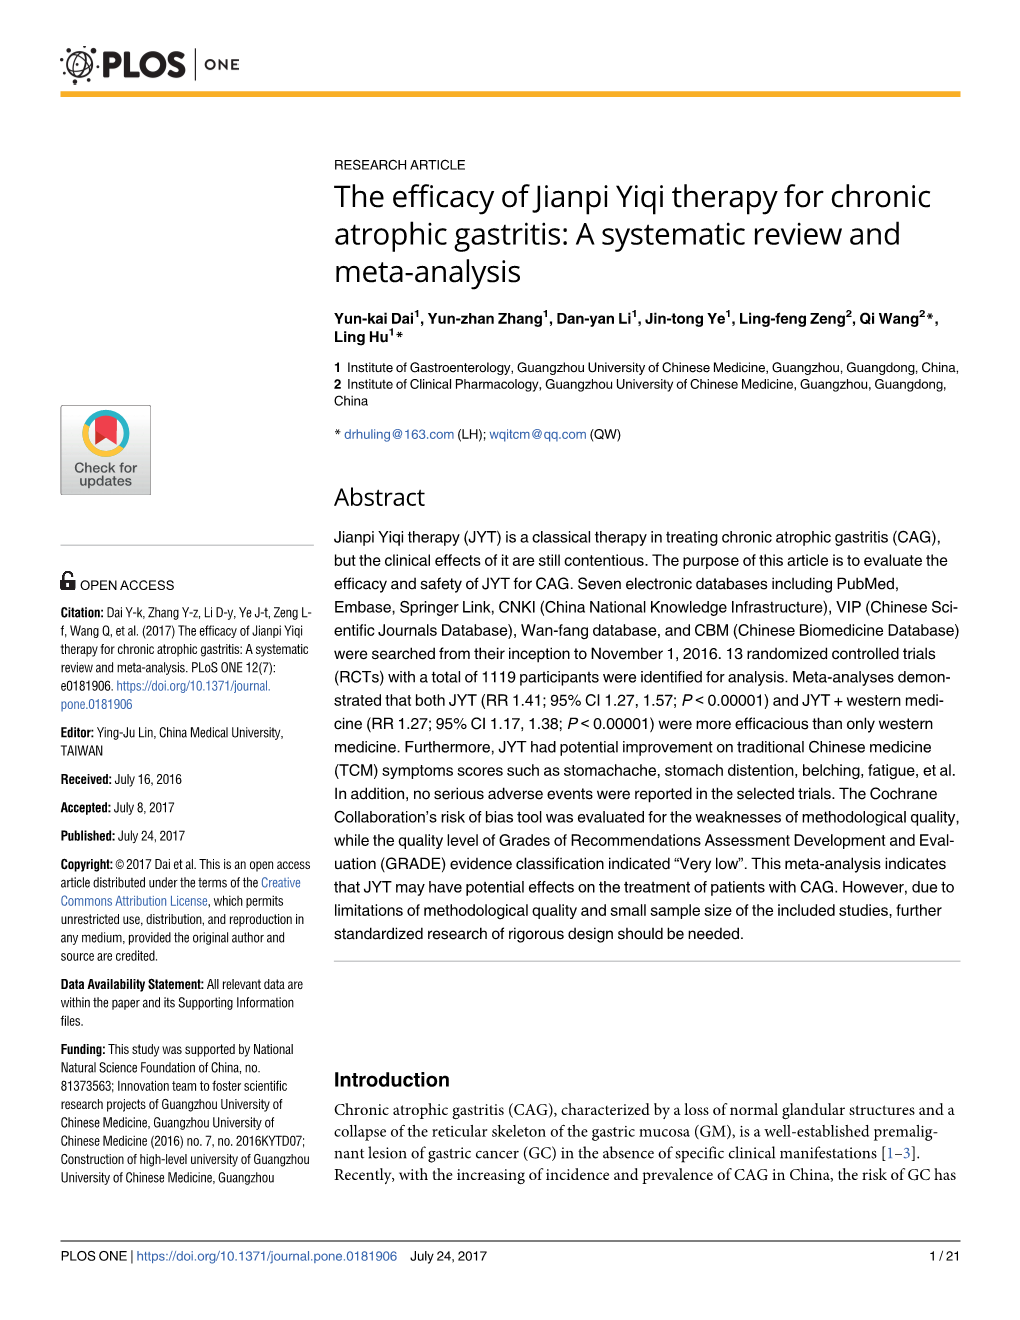 The Efficacy of Jianpi Yiqi Therapy for Chronic Atrophic Gastritis: a Systematic Review and Meta-Analysis